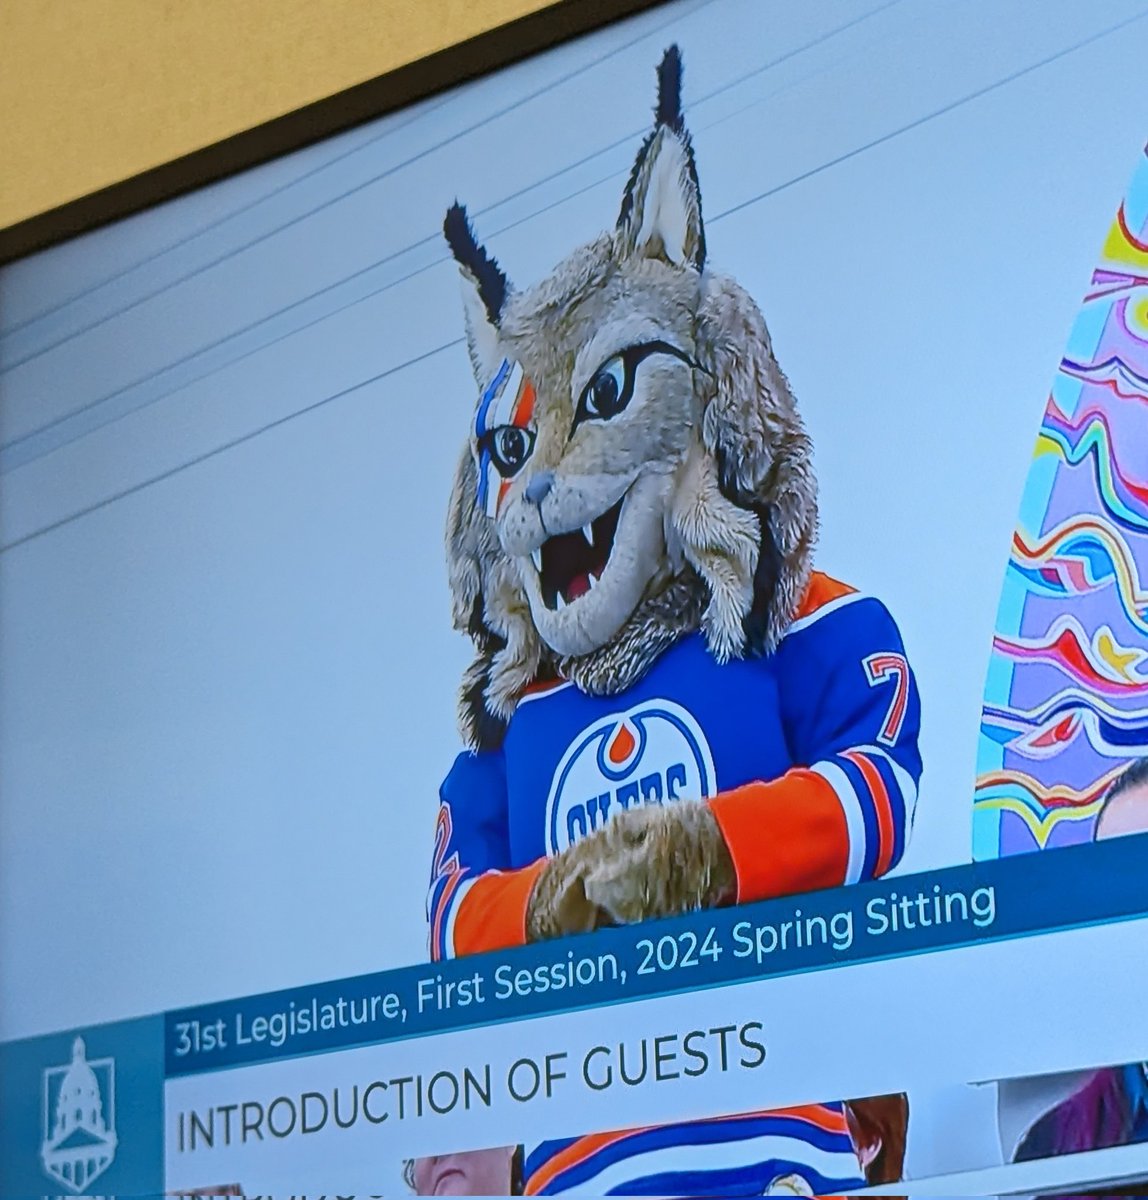 Hunter the Oilers mascot is in session today and the speaker is wearing a referee shirt. I love seeing all the Oilers jerseys #GoOilers